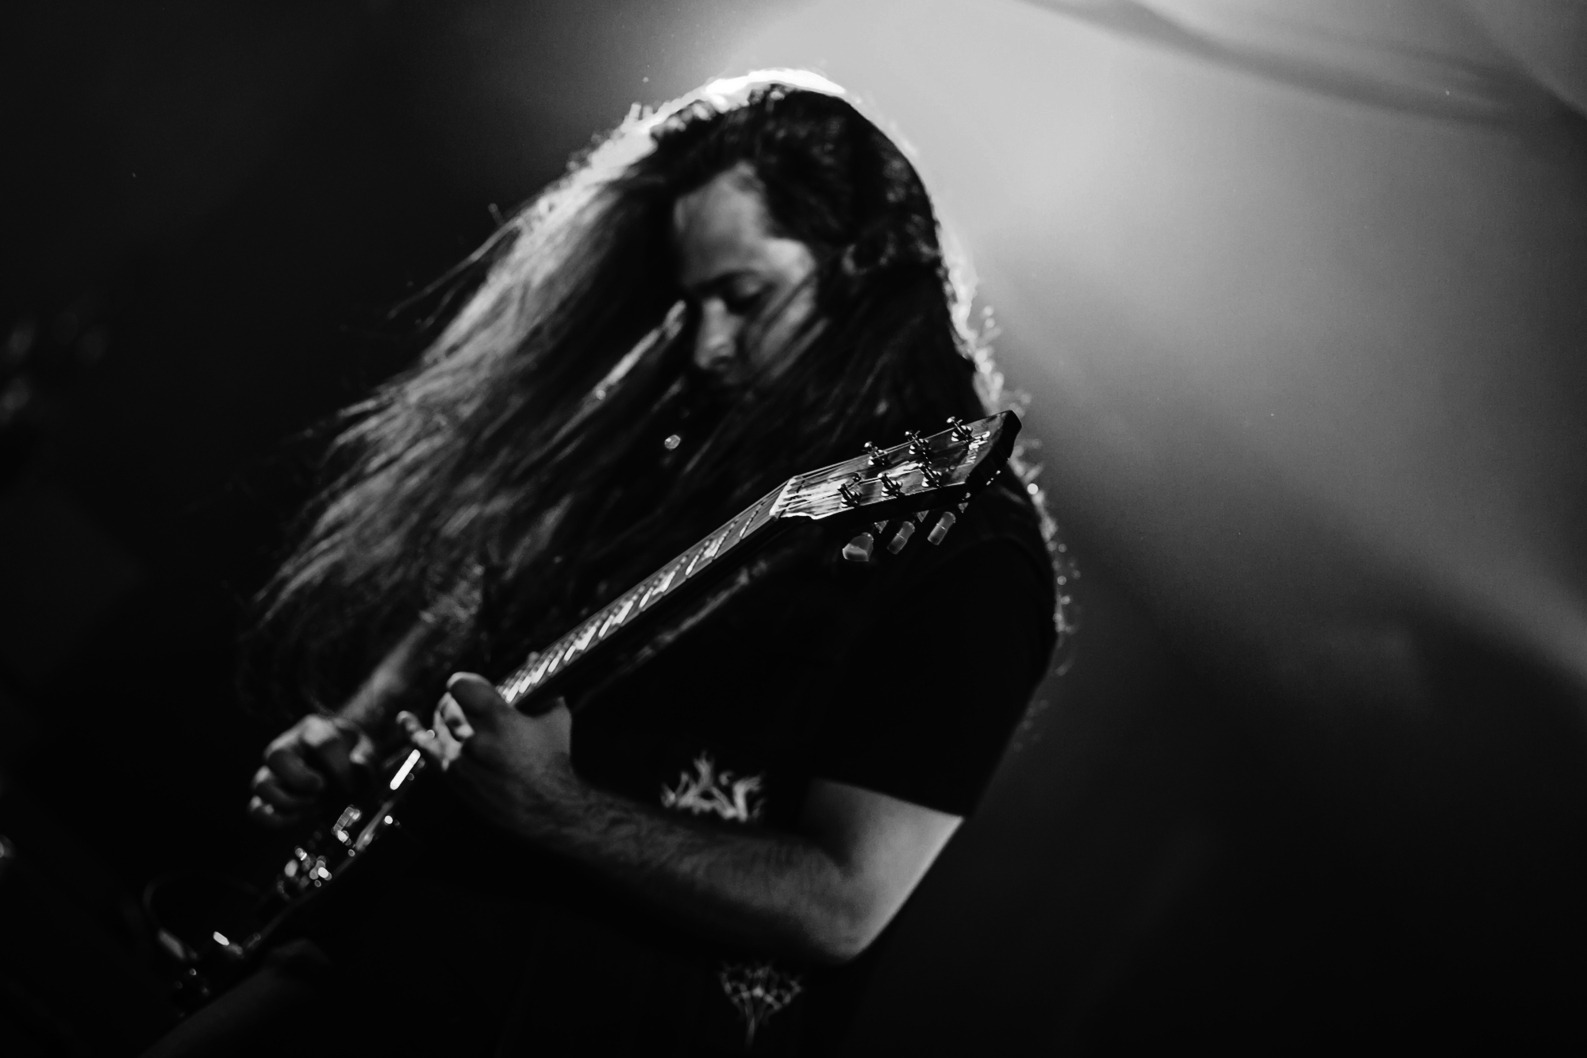 Read more about the article Οι Black Metallers SELBST ανακοίνωσαν το νέο άλμπουμ «Despondency Chord Progressions» και κυκλοφόρησαν το νέο single « Chant Of Self Confrontation».